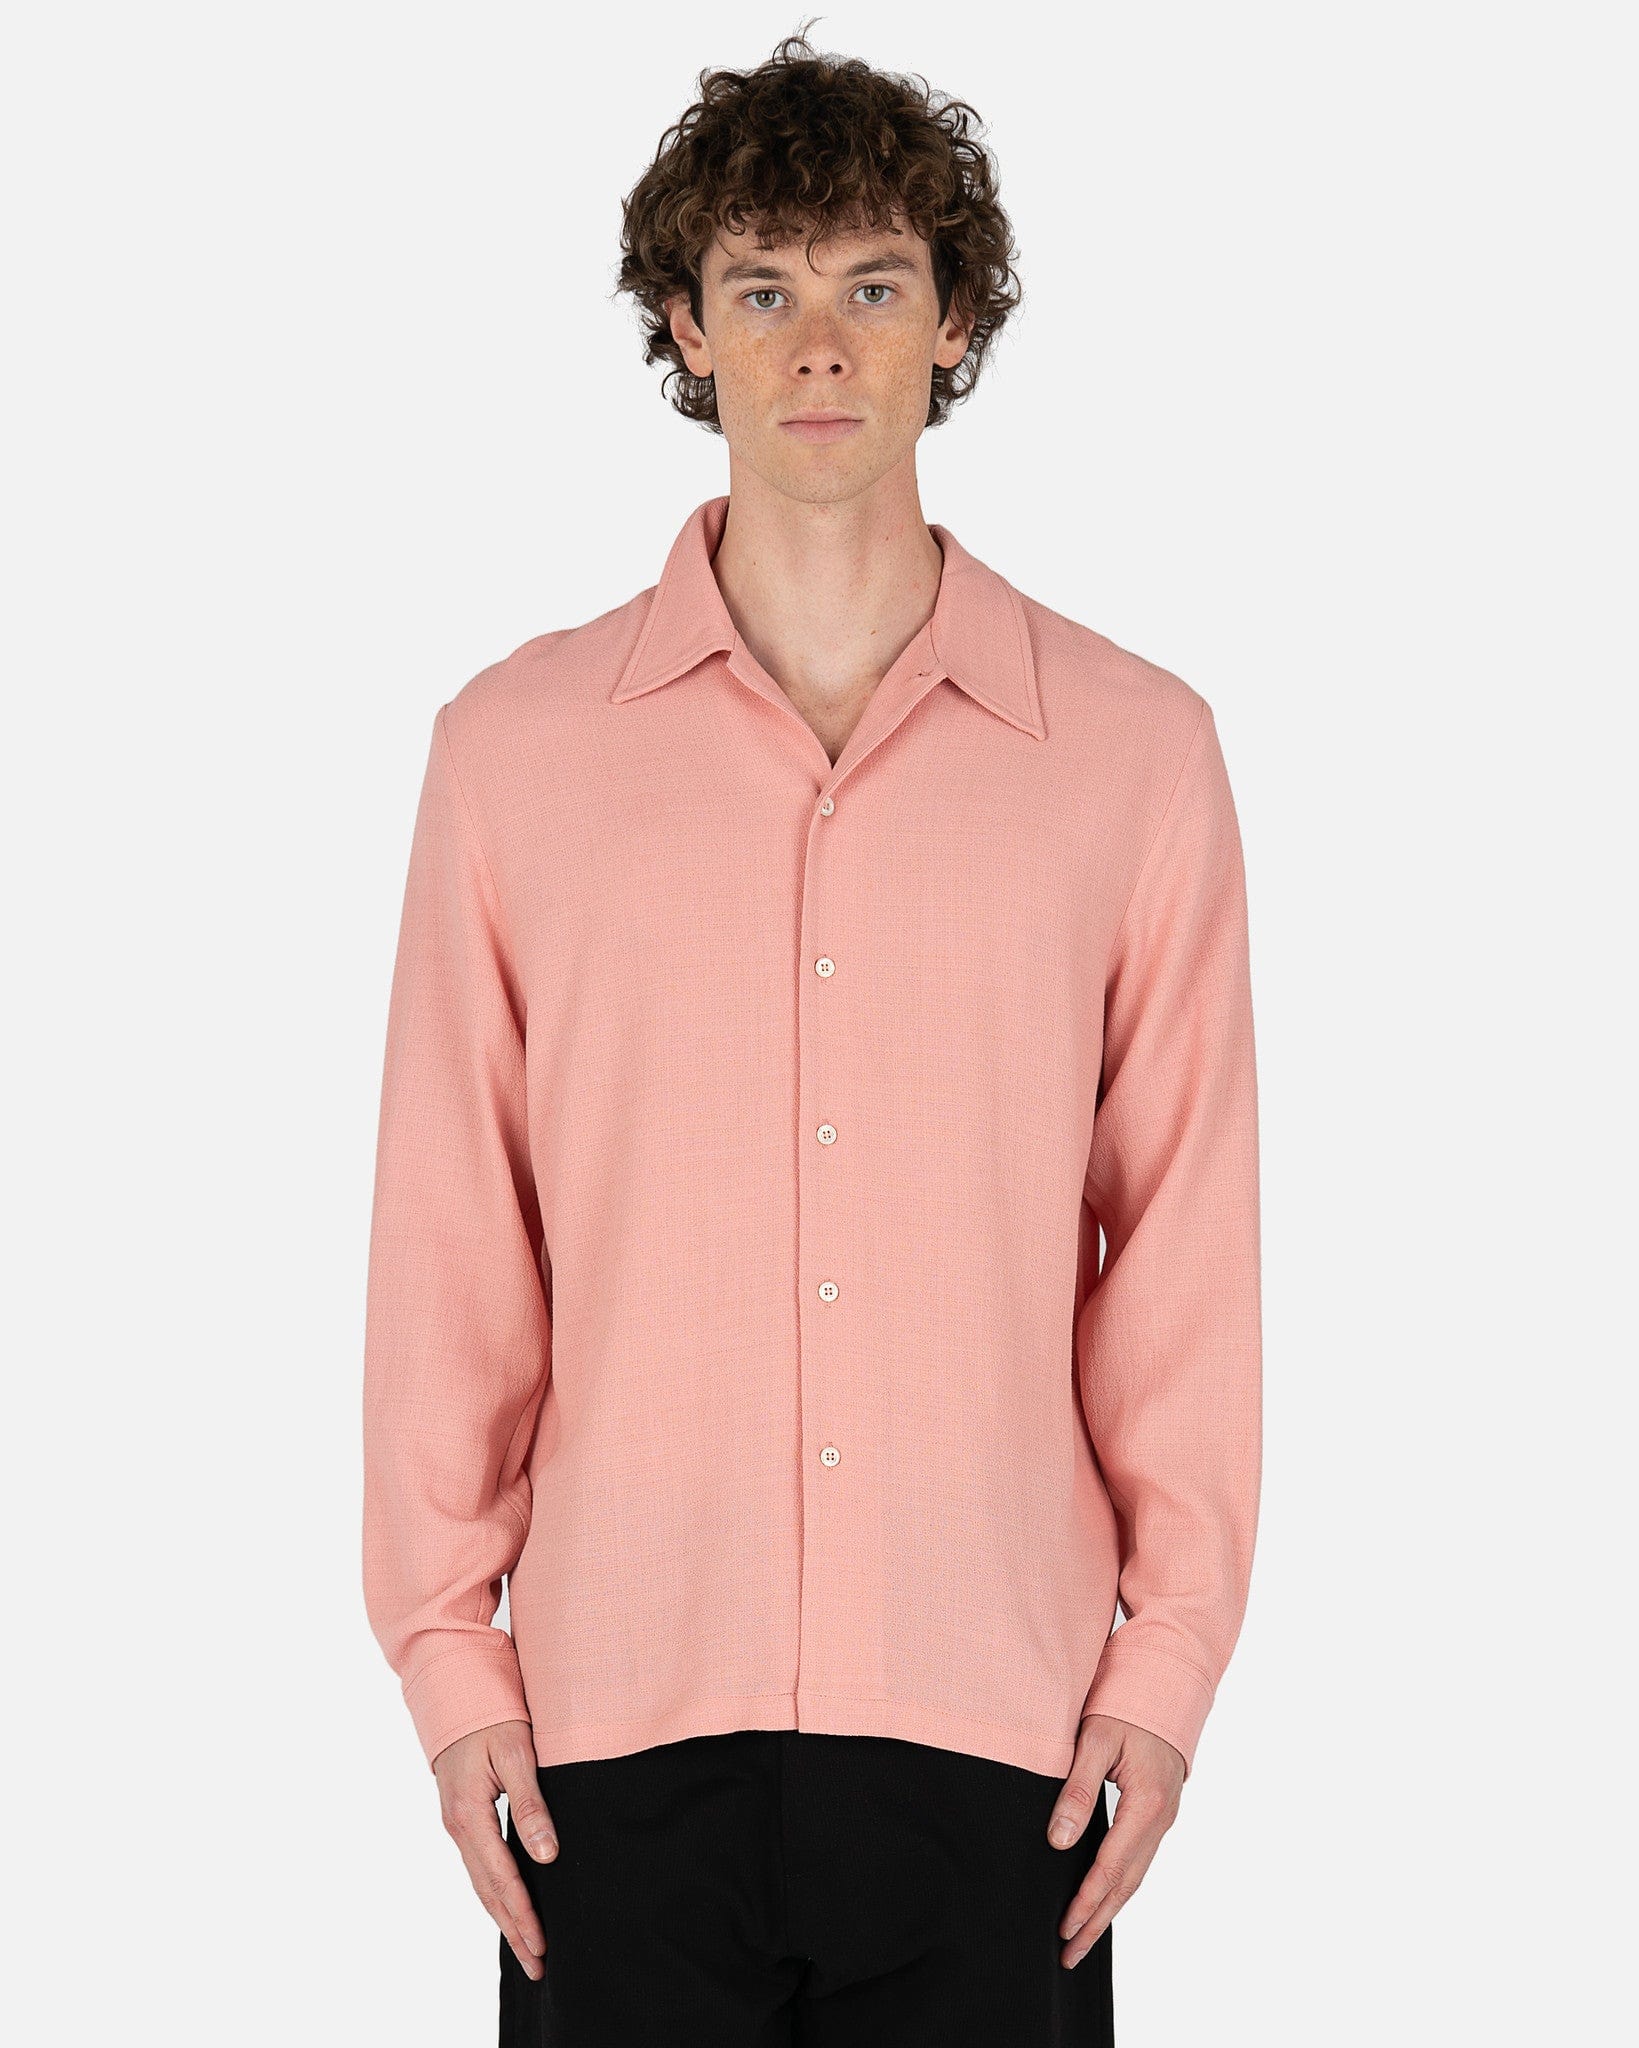 Séfr Men's Shirts Rampoua Shirt in Cold Pink